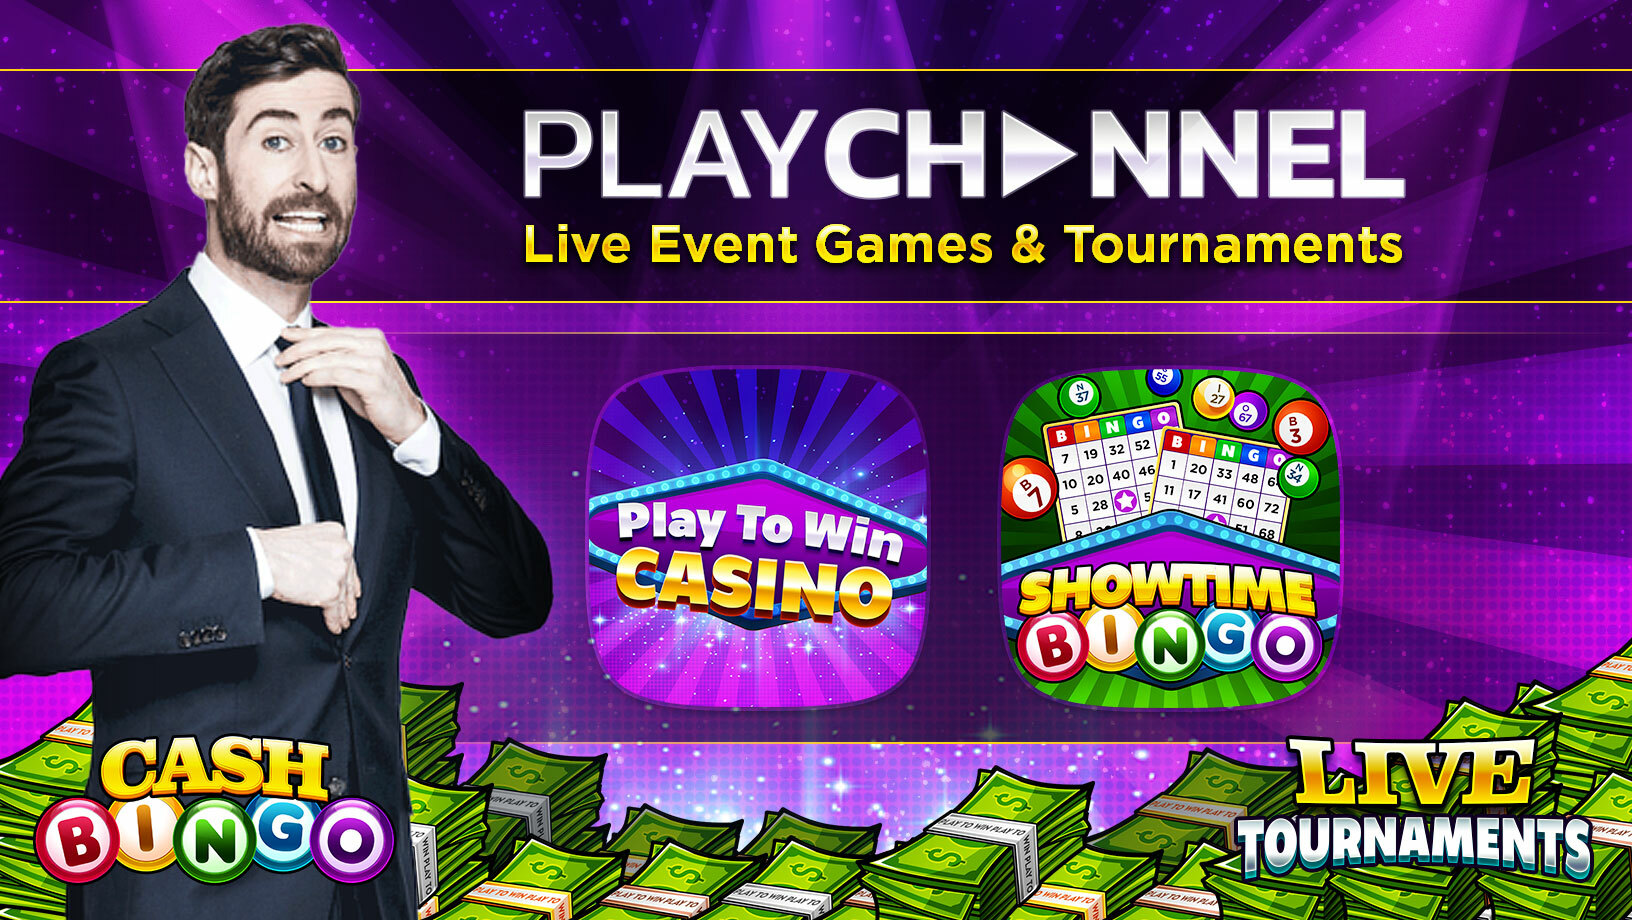 Hit it Rich! Casino Slots Game – Apps no Google Play